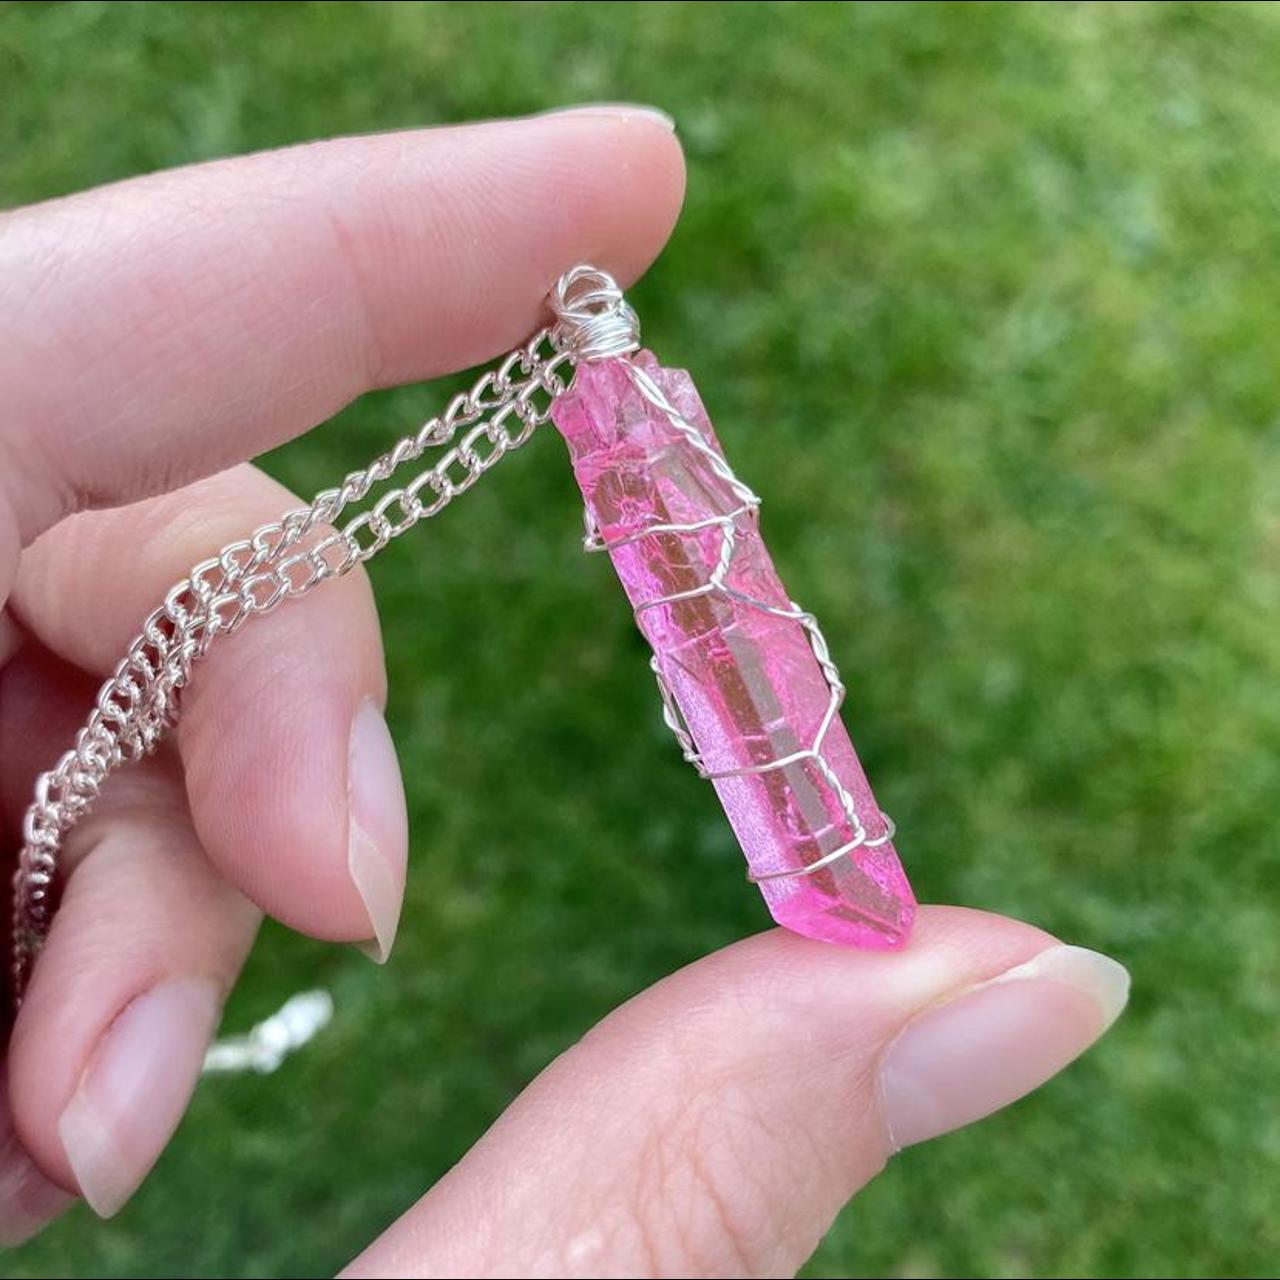 Product Image 1 - Pink crystal quarts shard wrapped